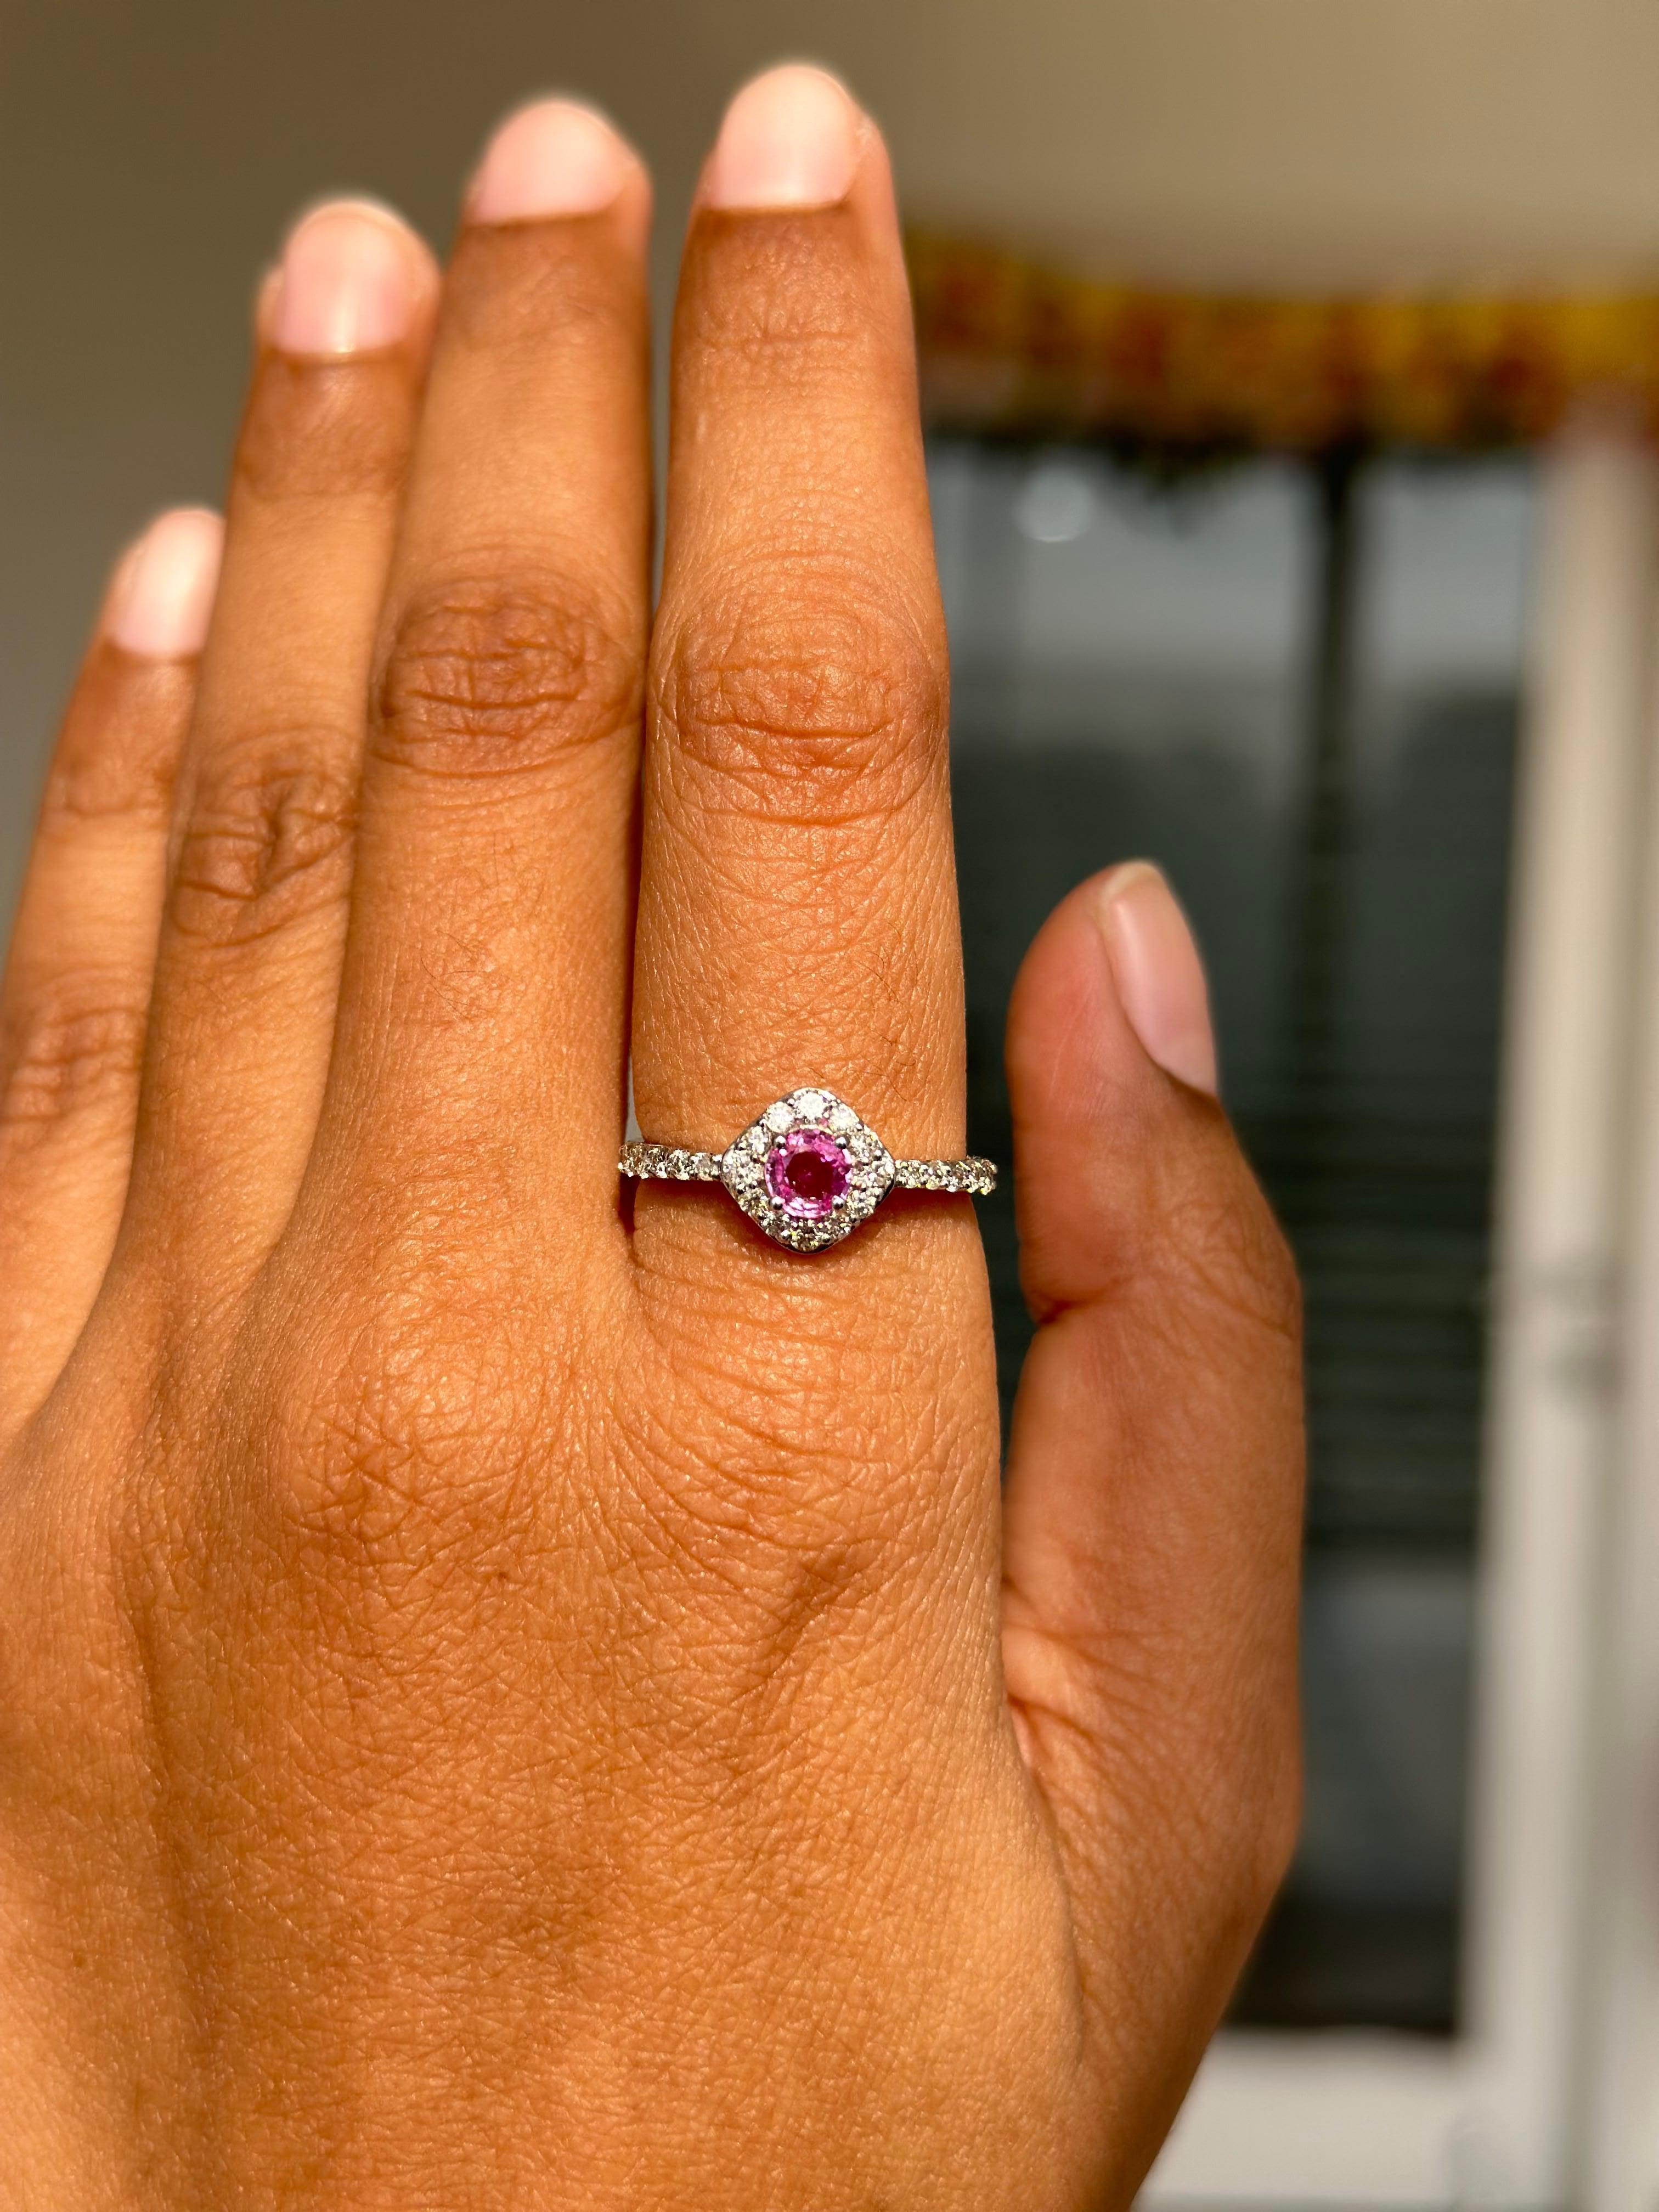 For Sale:  Minimal Halo Diamond and Pink Sapphire Ring Studded in 14k Solid White Gold 5